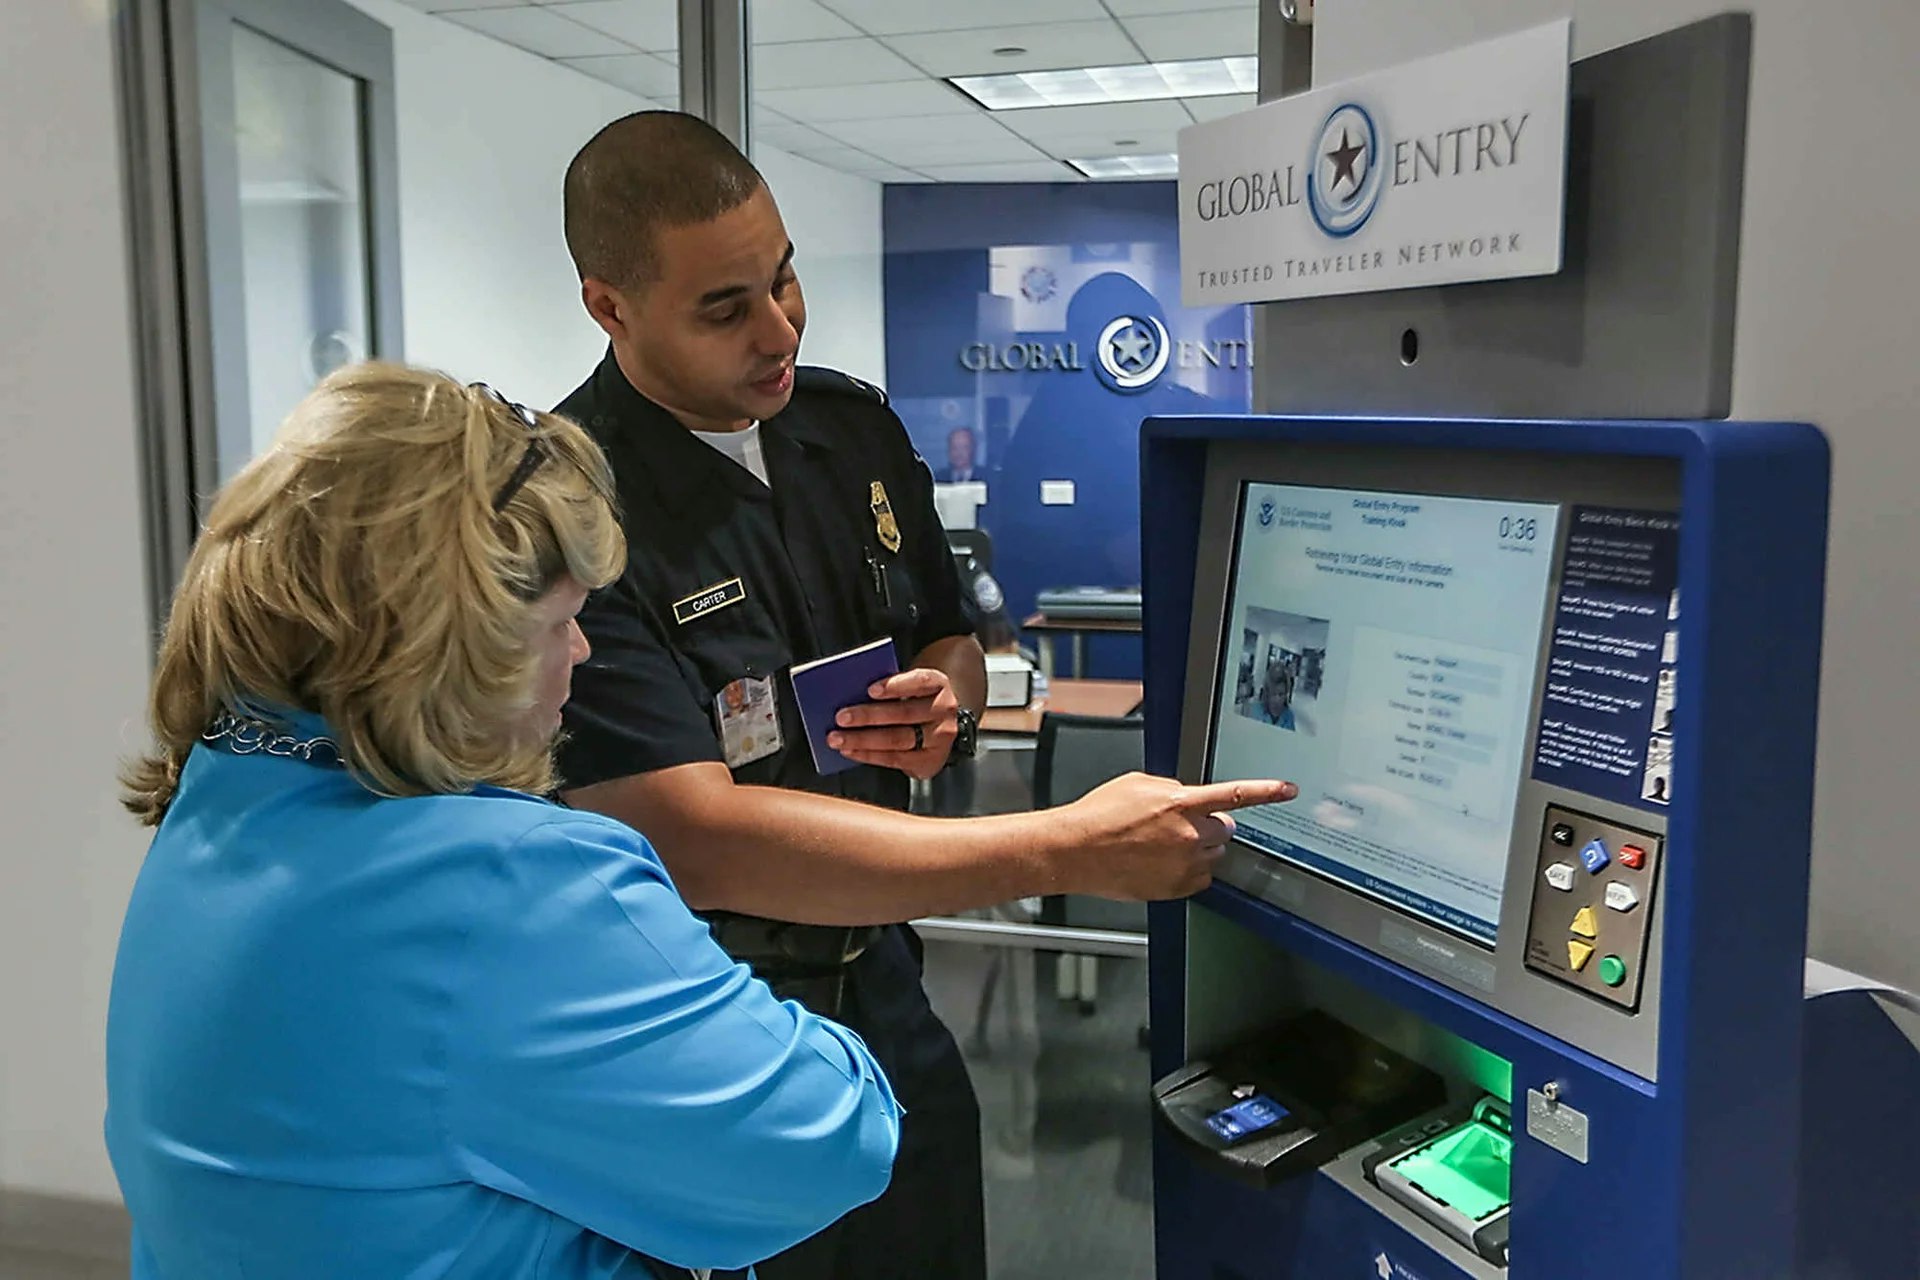 Global Entry stations